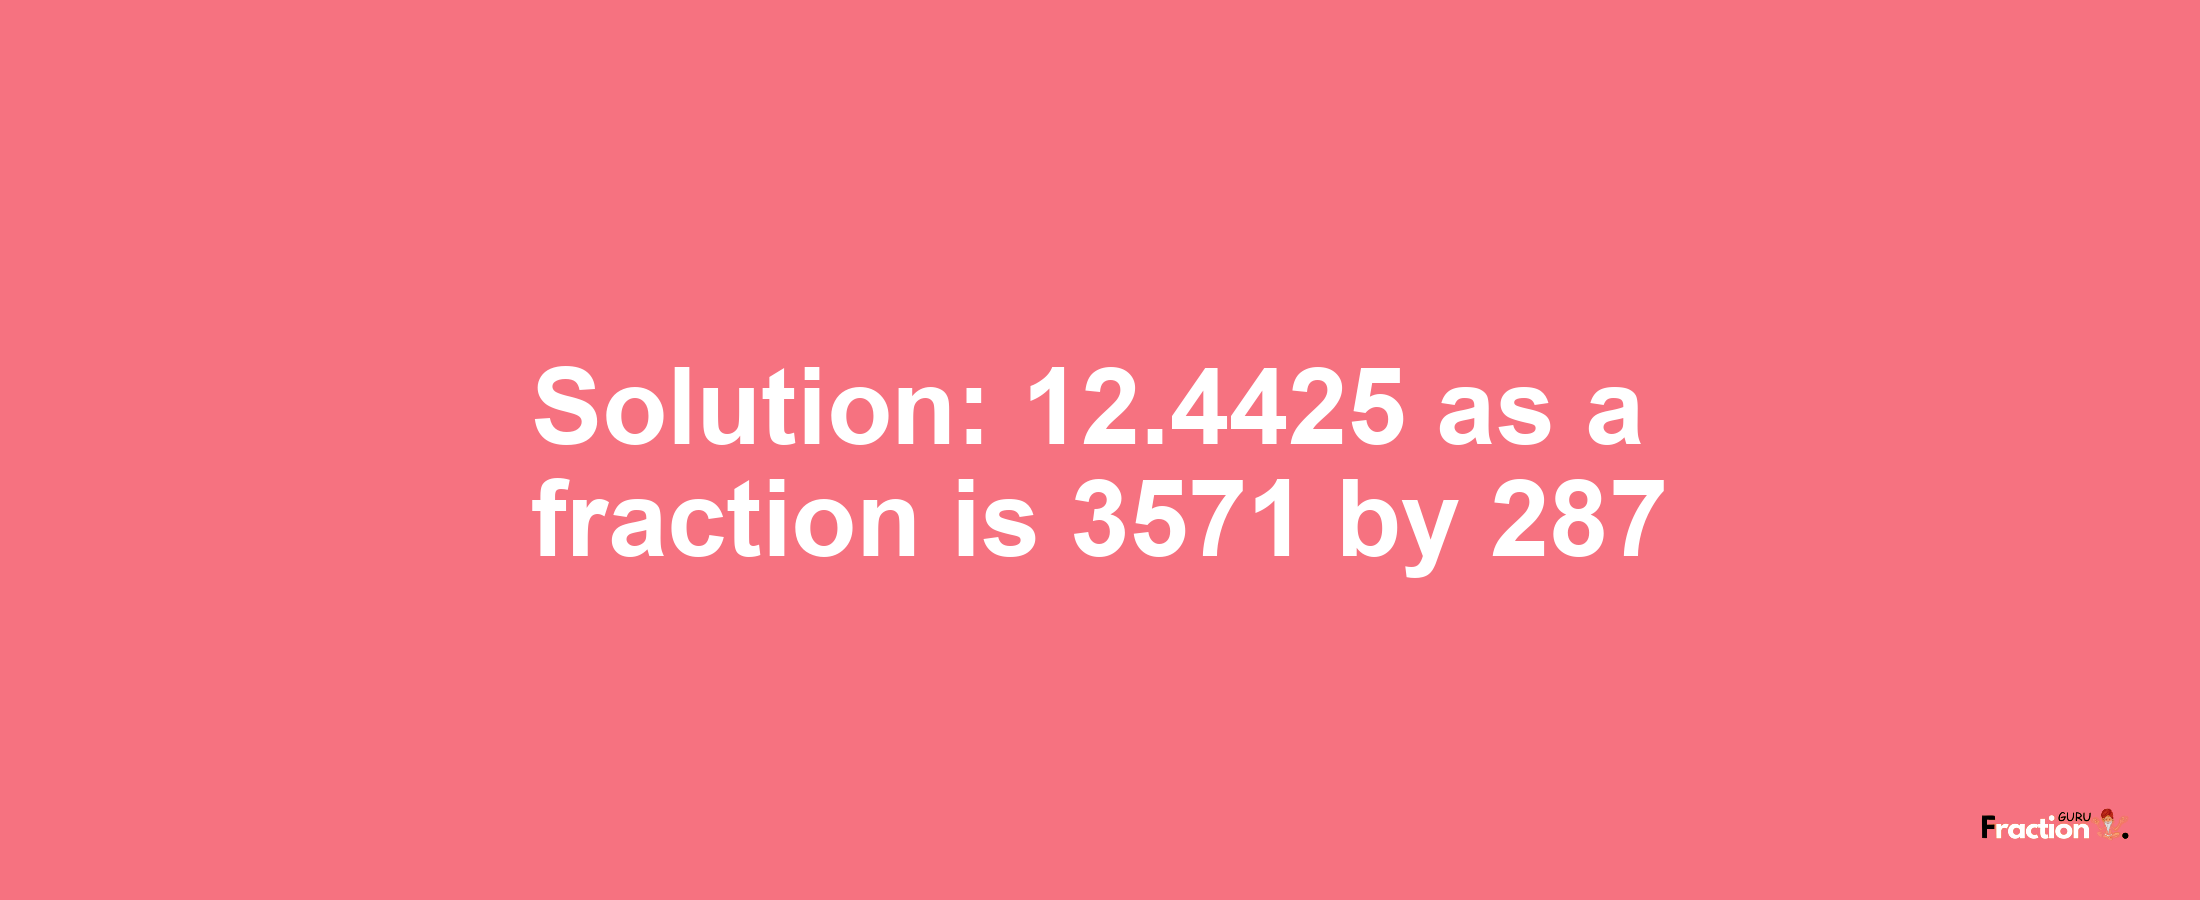 Solution:12.4425 as a fraction is 3571/287